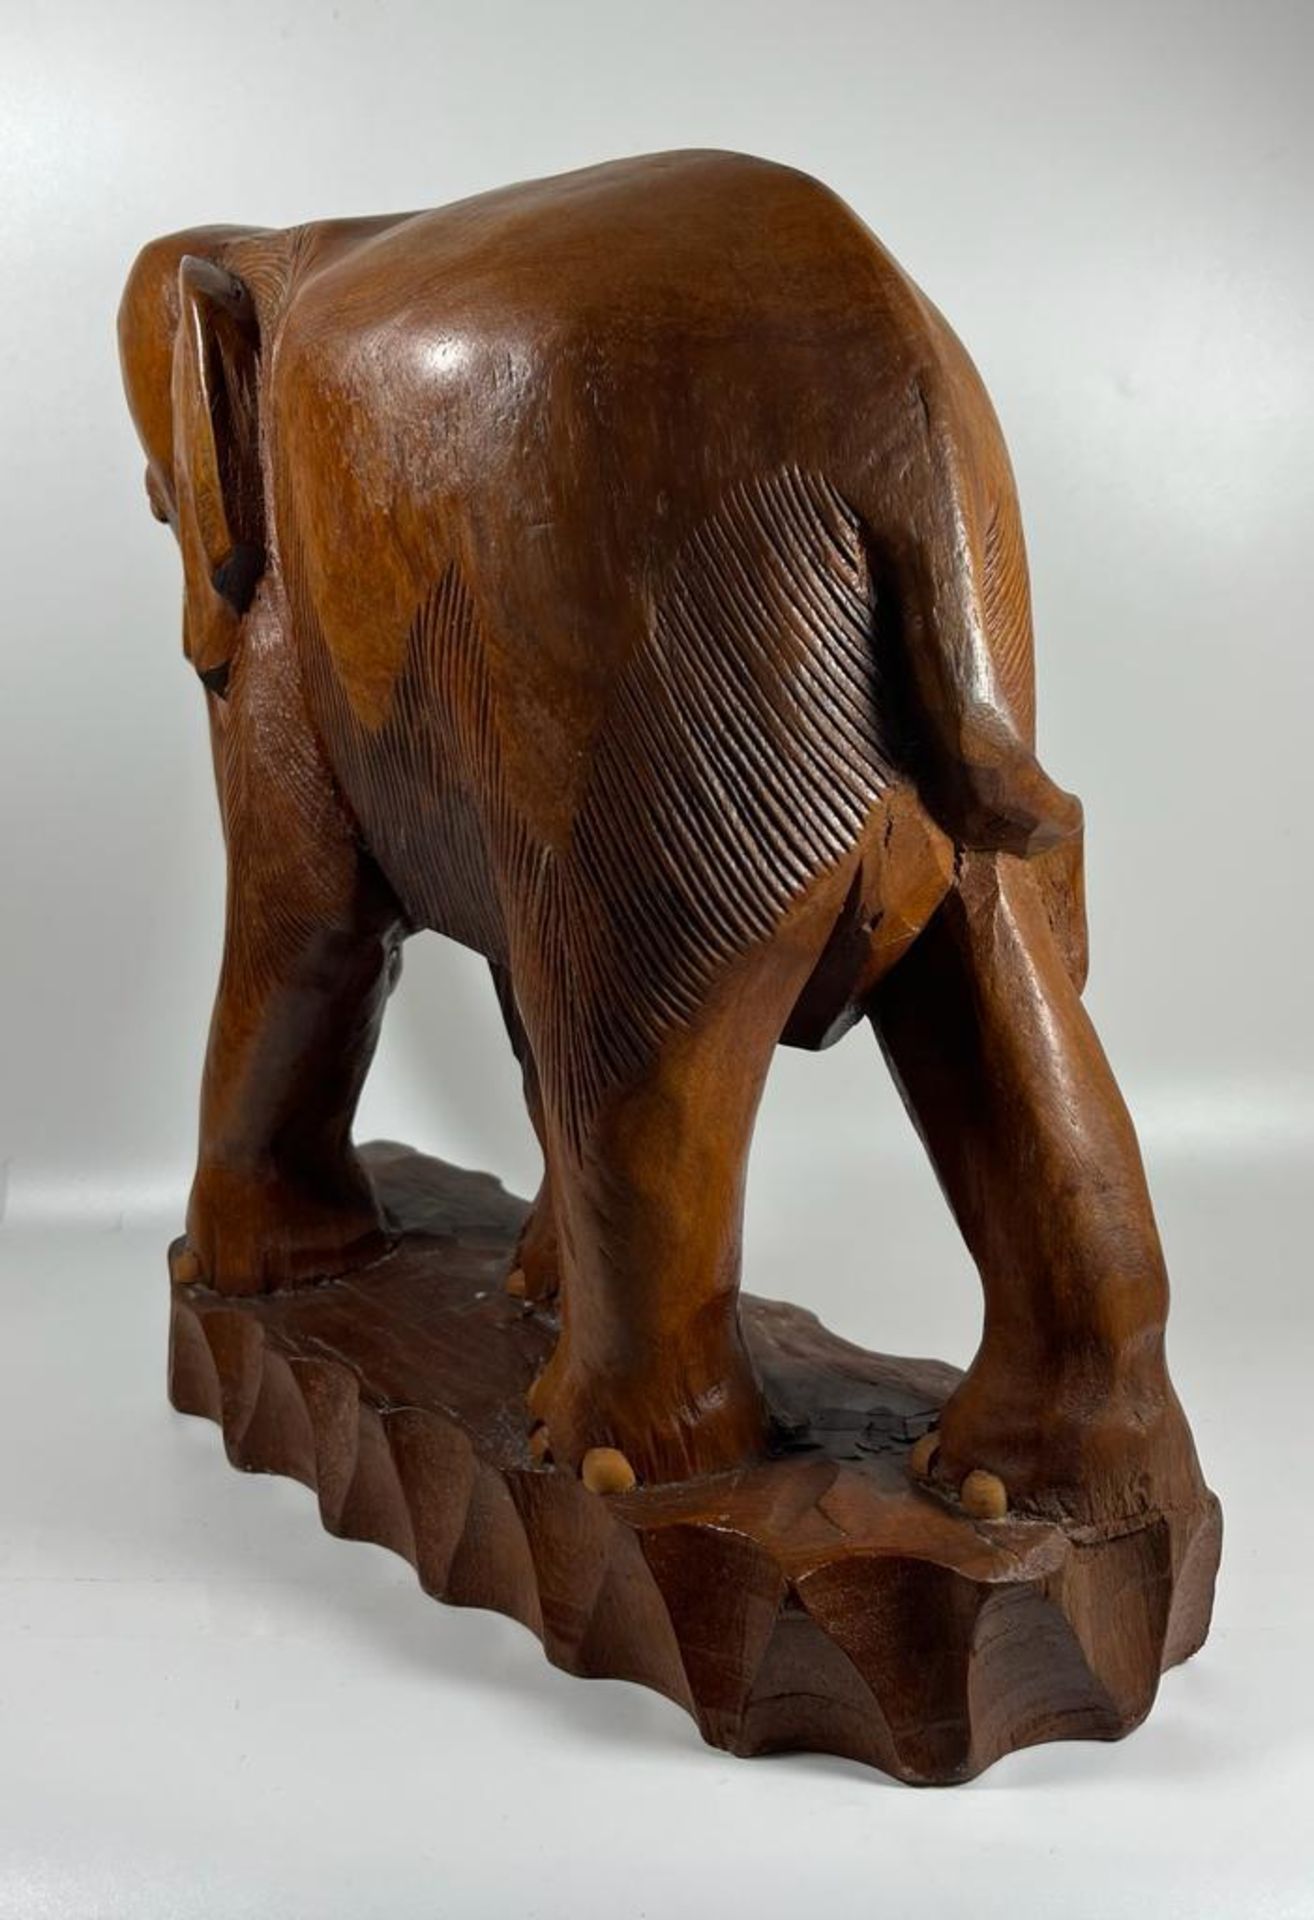 A LARGE AND HEAVY VINTAGE CARVED SOLID TEAK ELEPHANT MODEL, LIKELY CARVED FROM ONE PIECE OF TEAK - Image 7 of 10